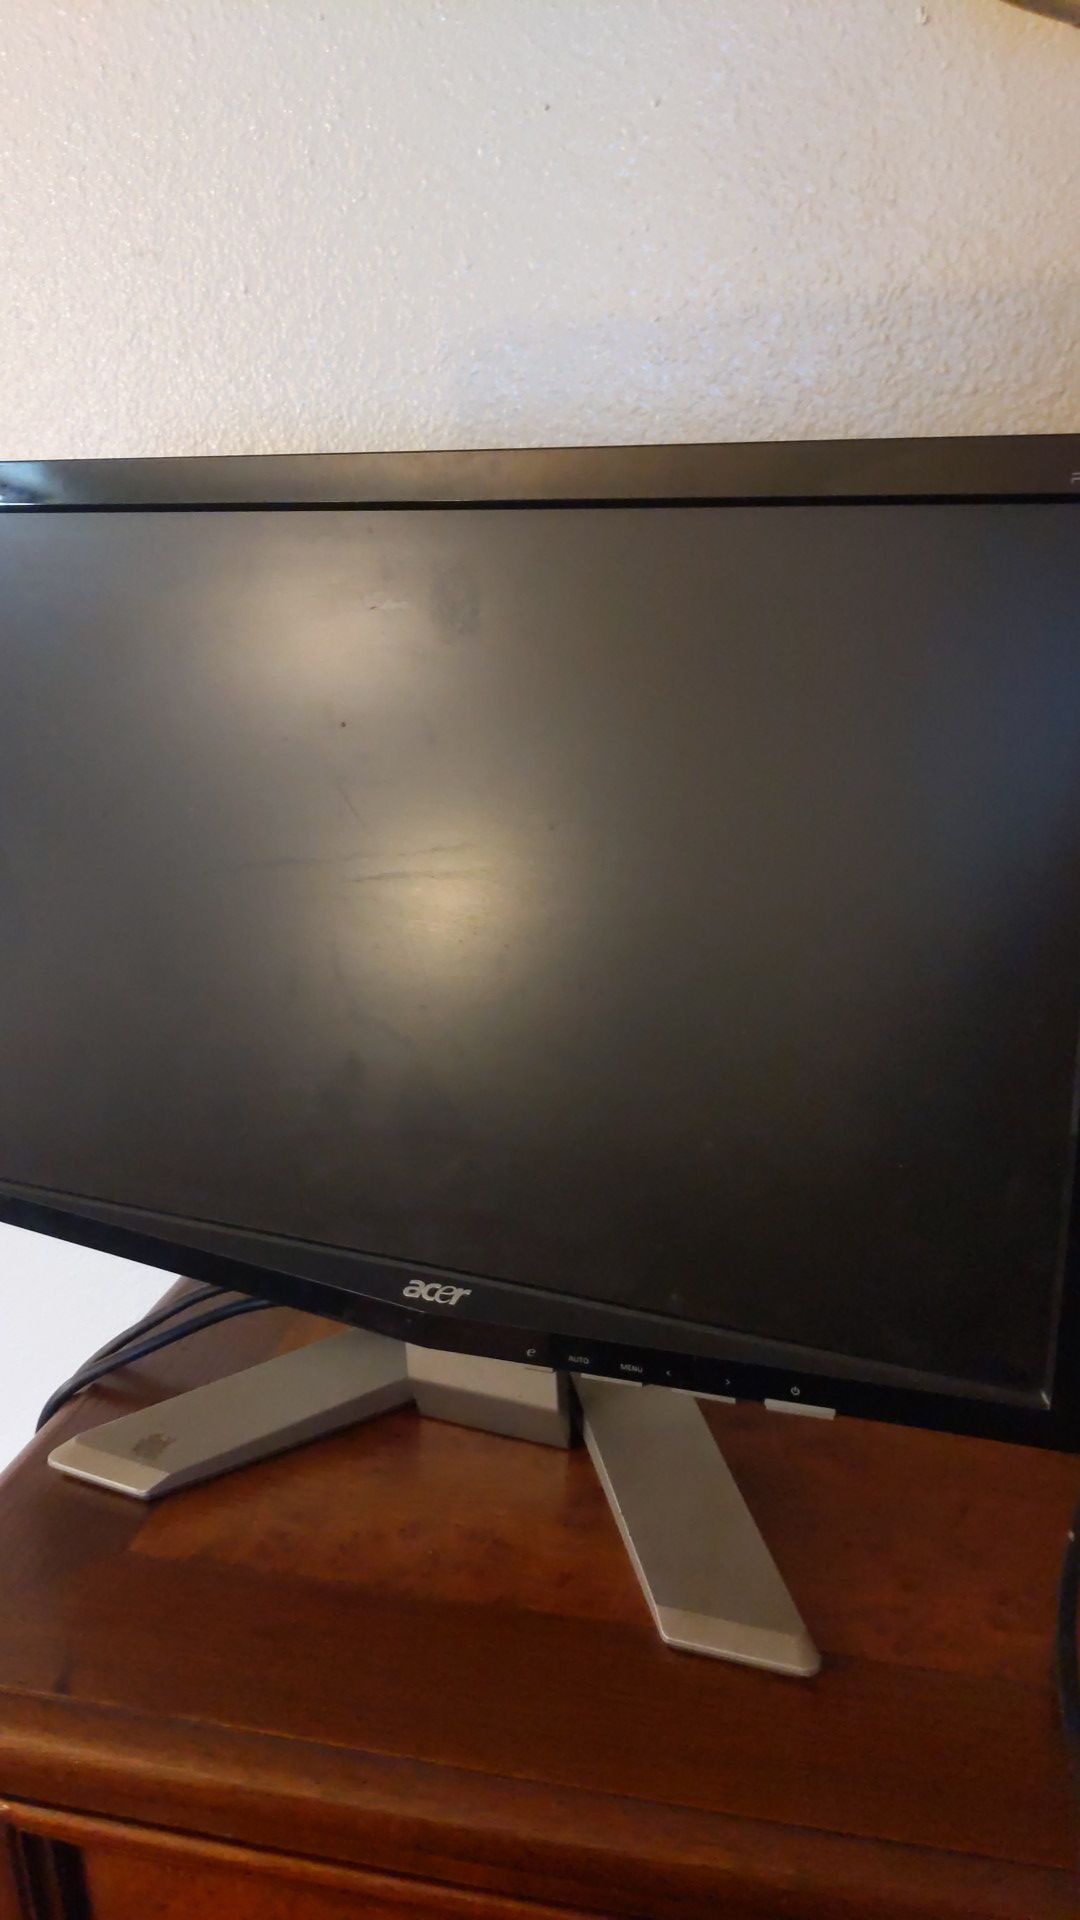 Acer P191 19" LED computer display